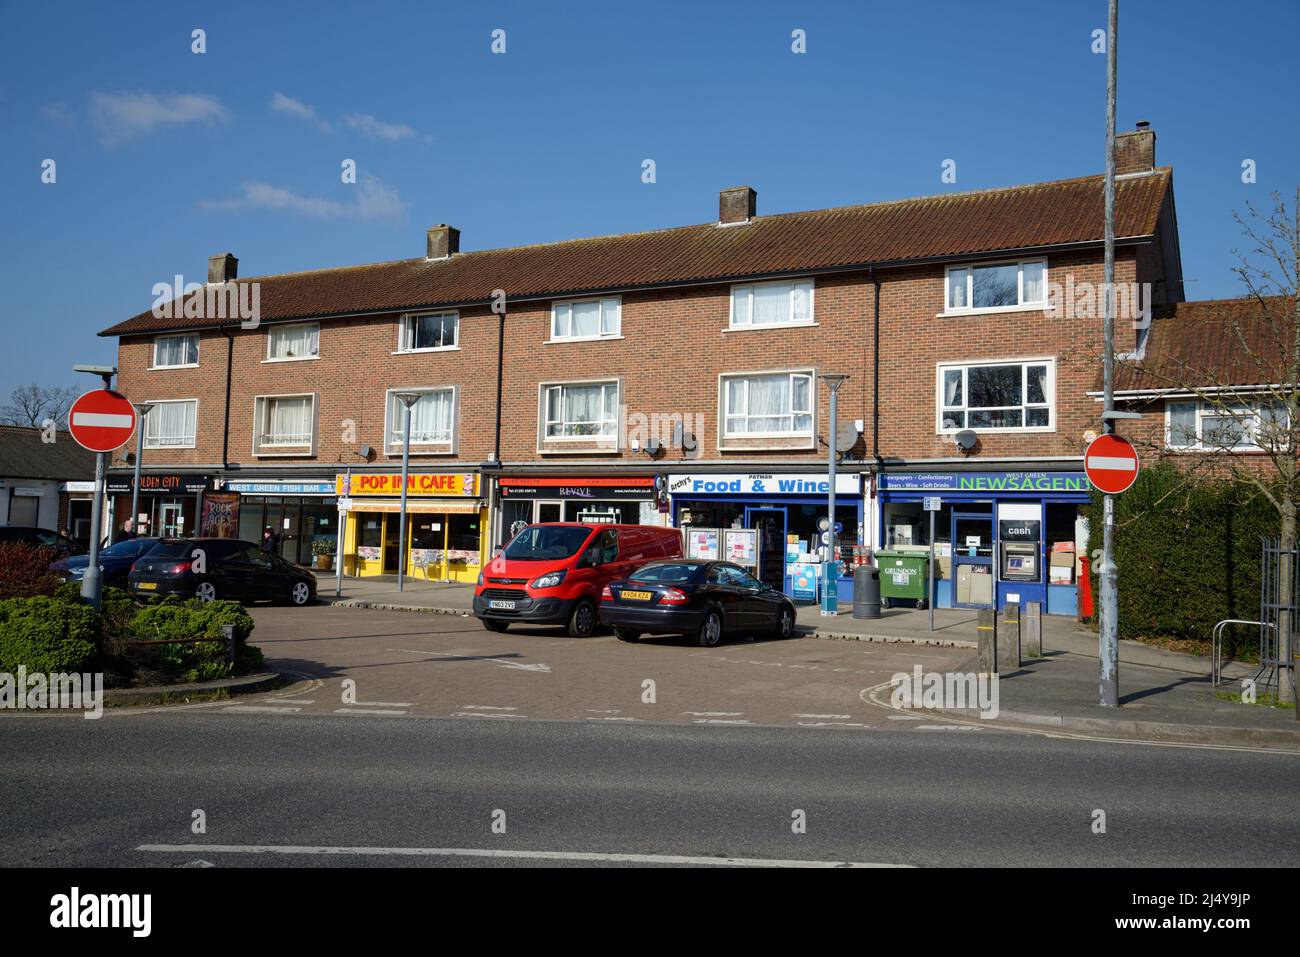 A small parade of local shops built in the 1960's. Situated in a post Second World War 'New Town' called Crawley, West Sussex, England. Stock Photo